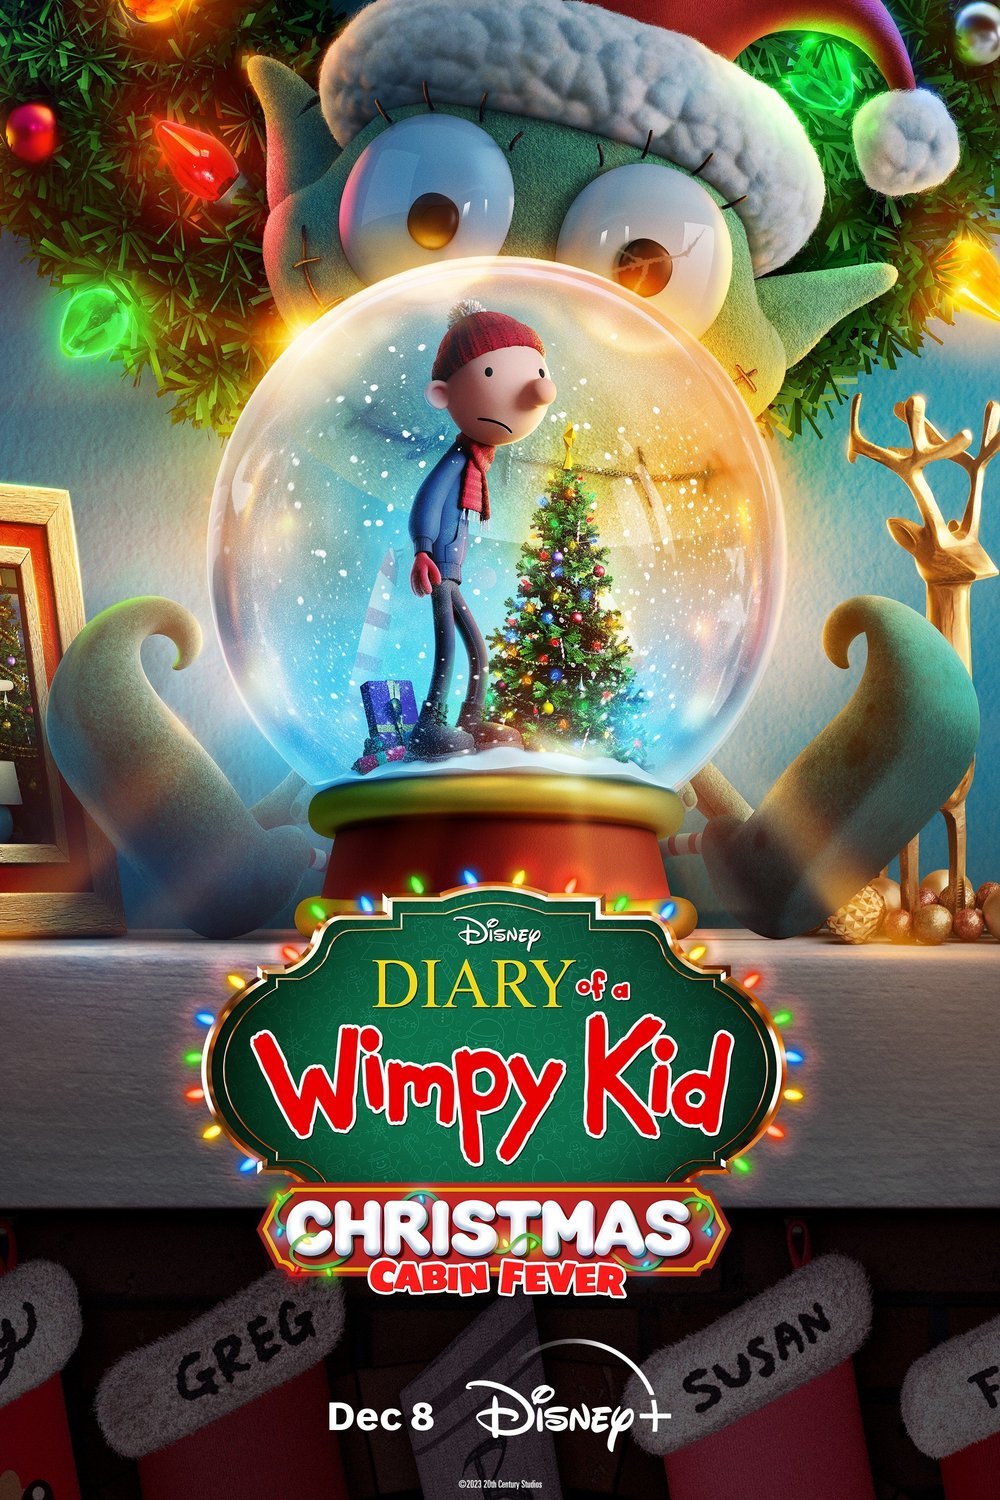 Poster of the movie Diary of a Wimpy Kid Christmas: Cabin Fever